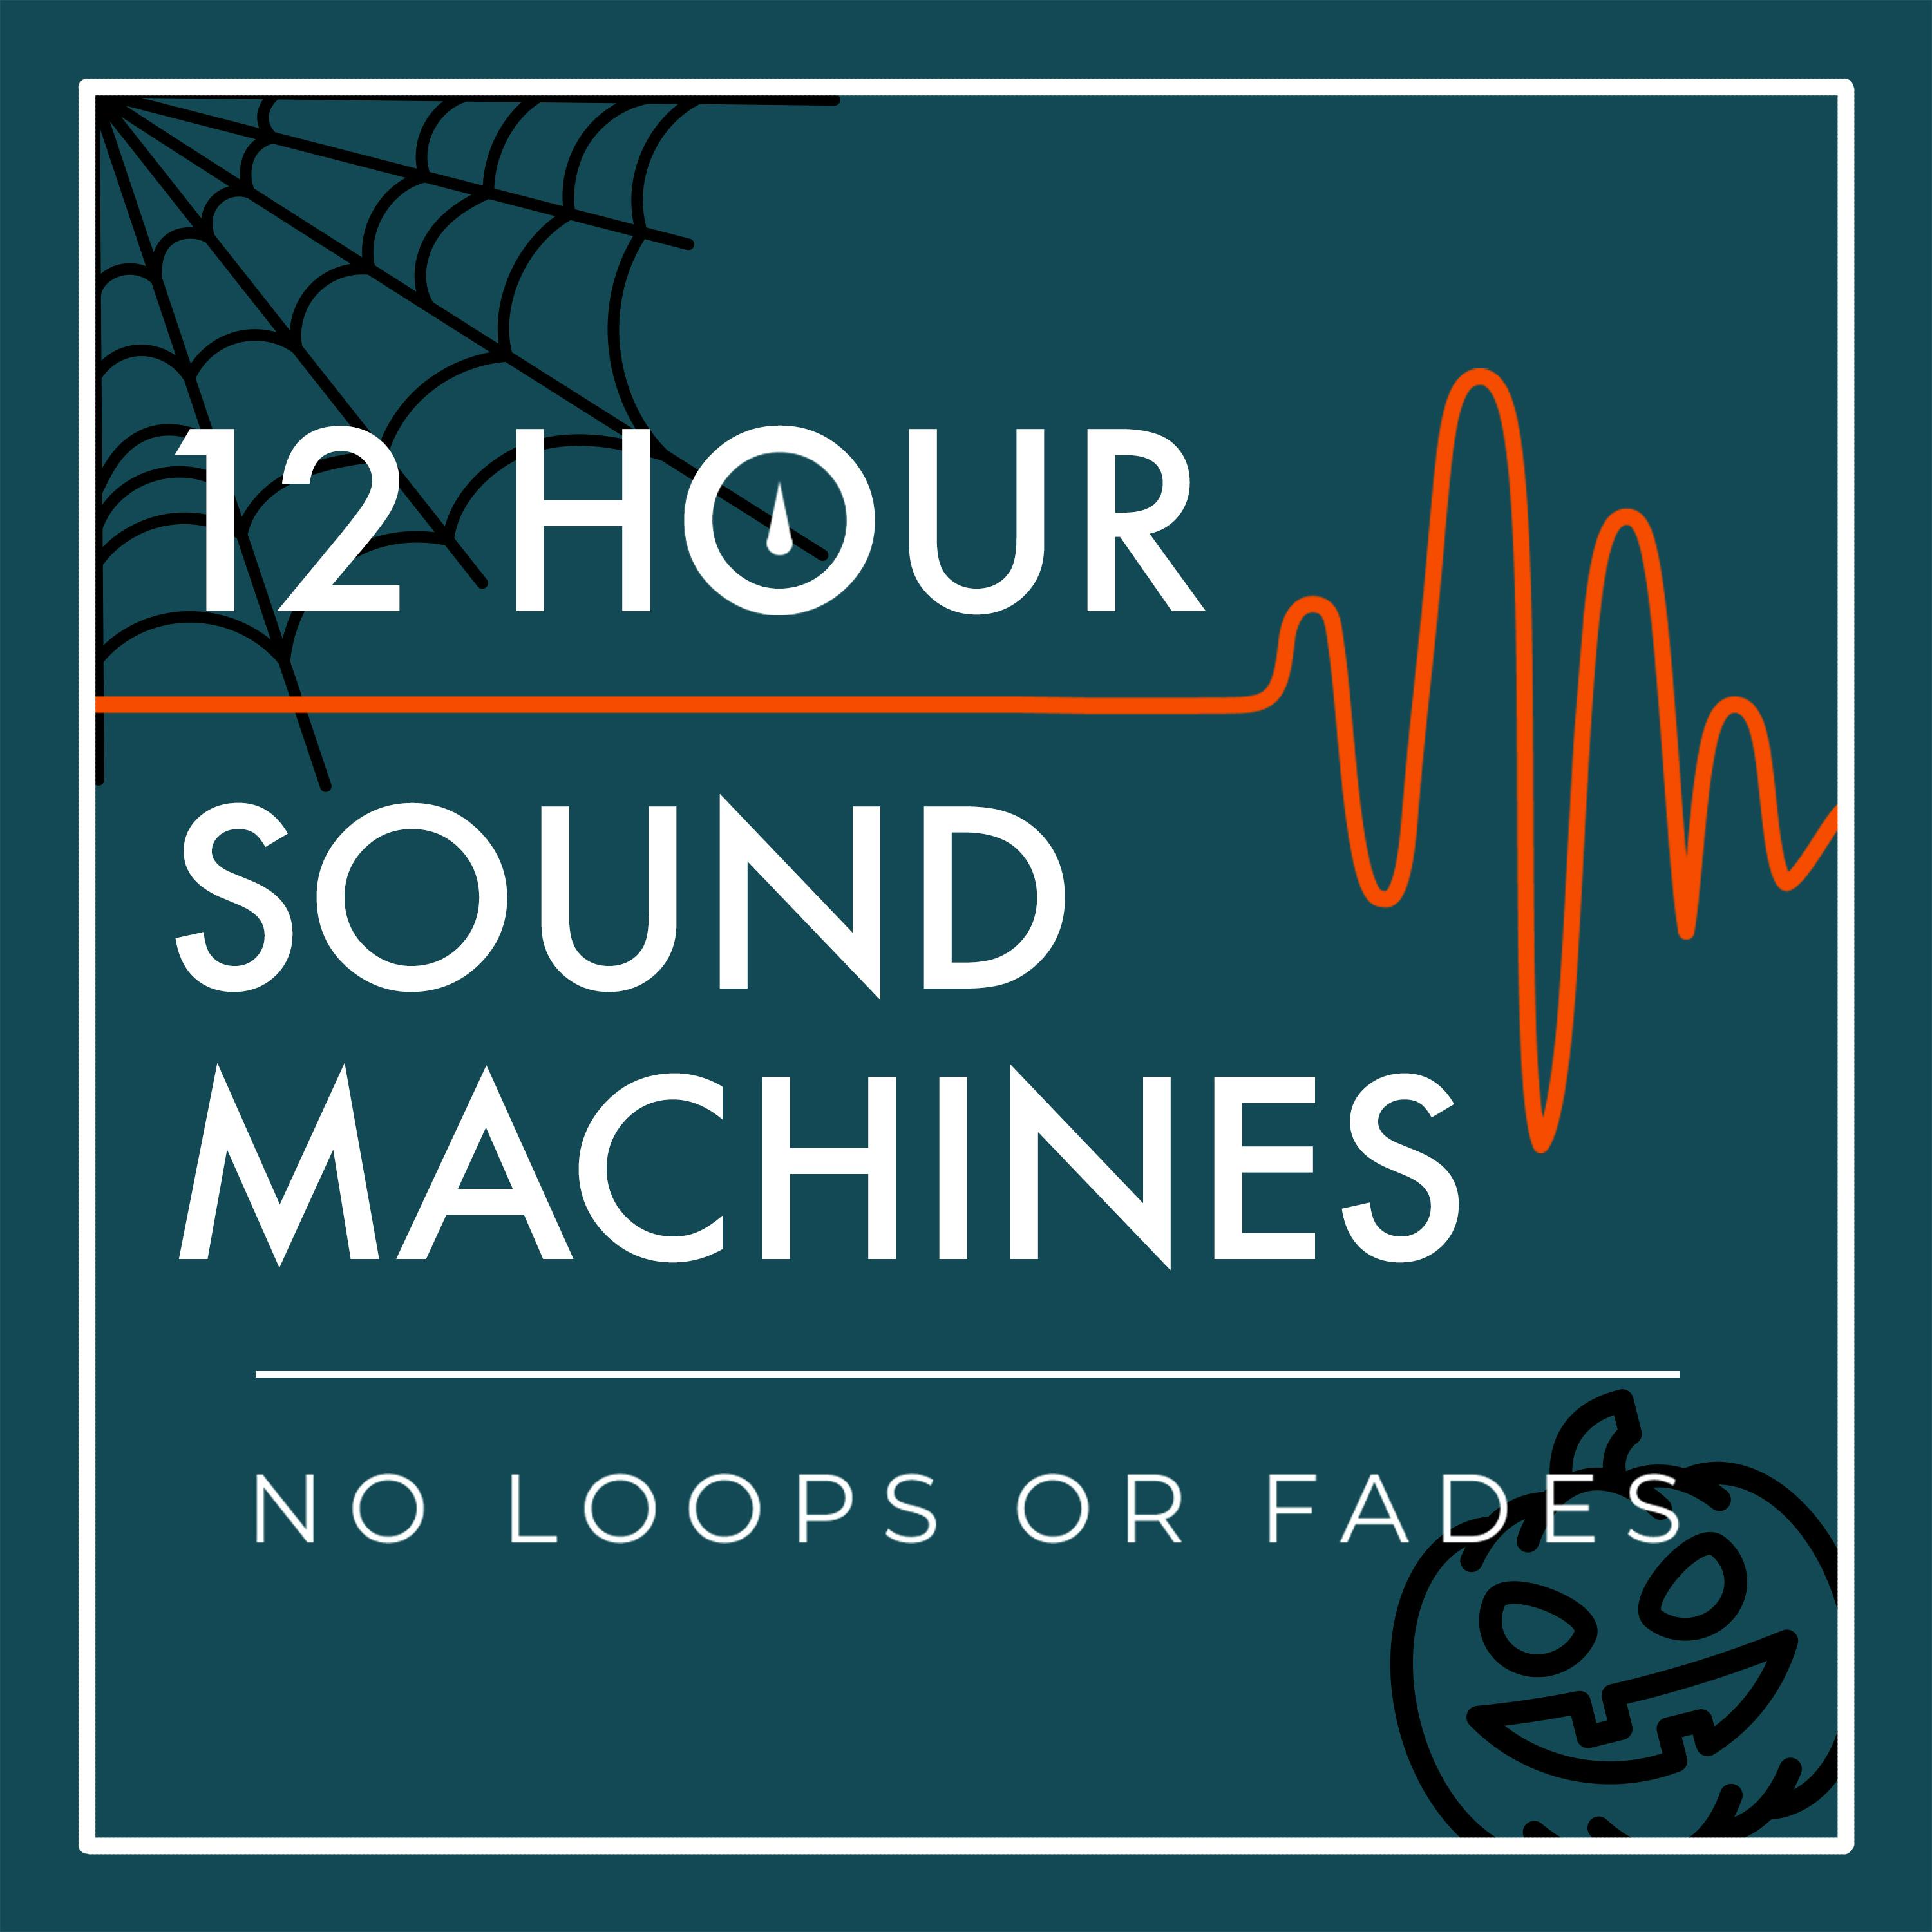 Haunted Mansion Sound Machine (12 Hours) - Spooky Soundscapes for Halloween